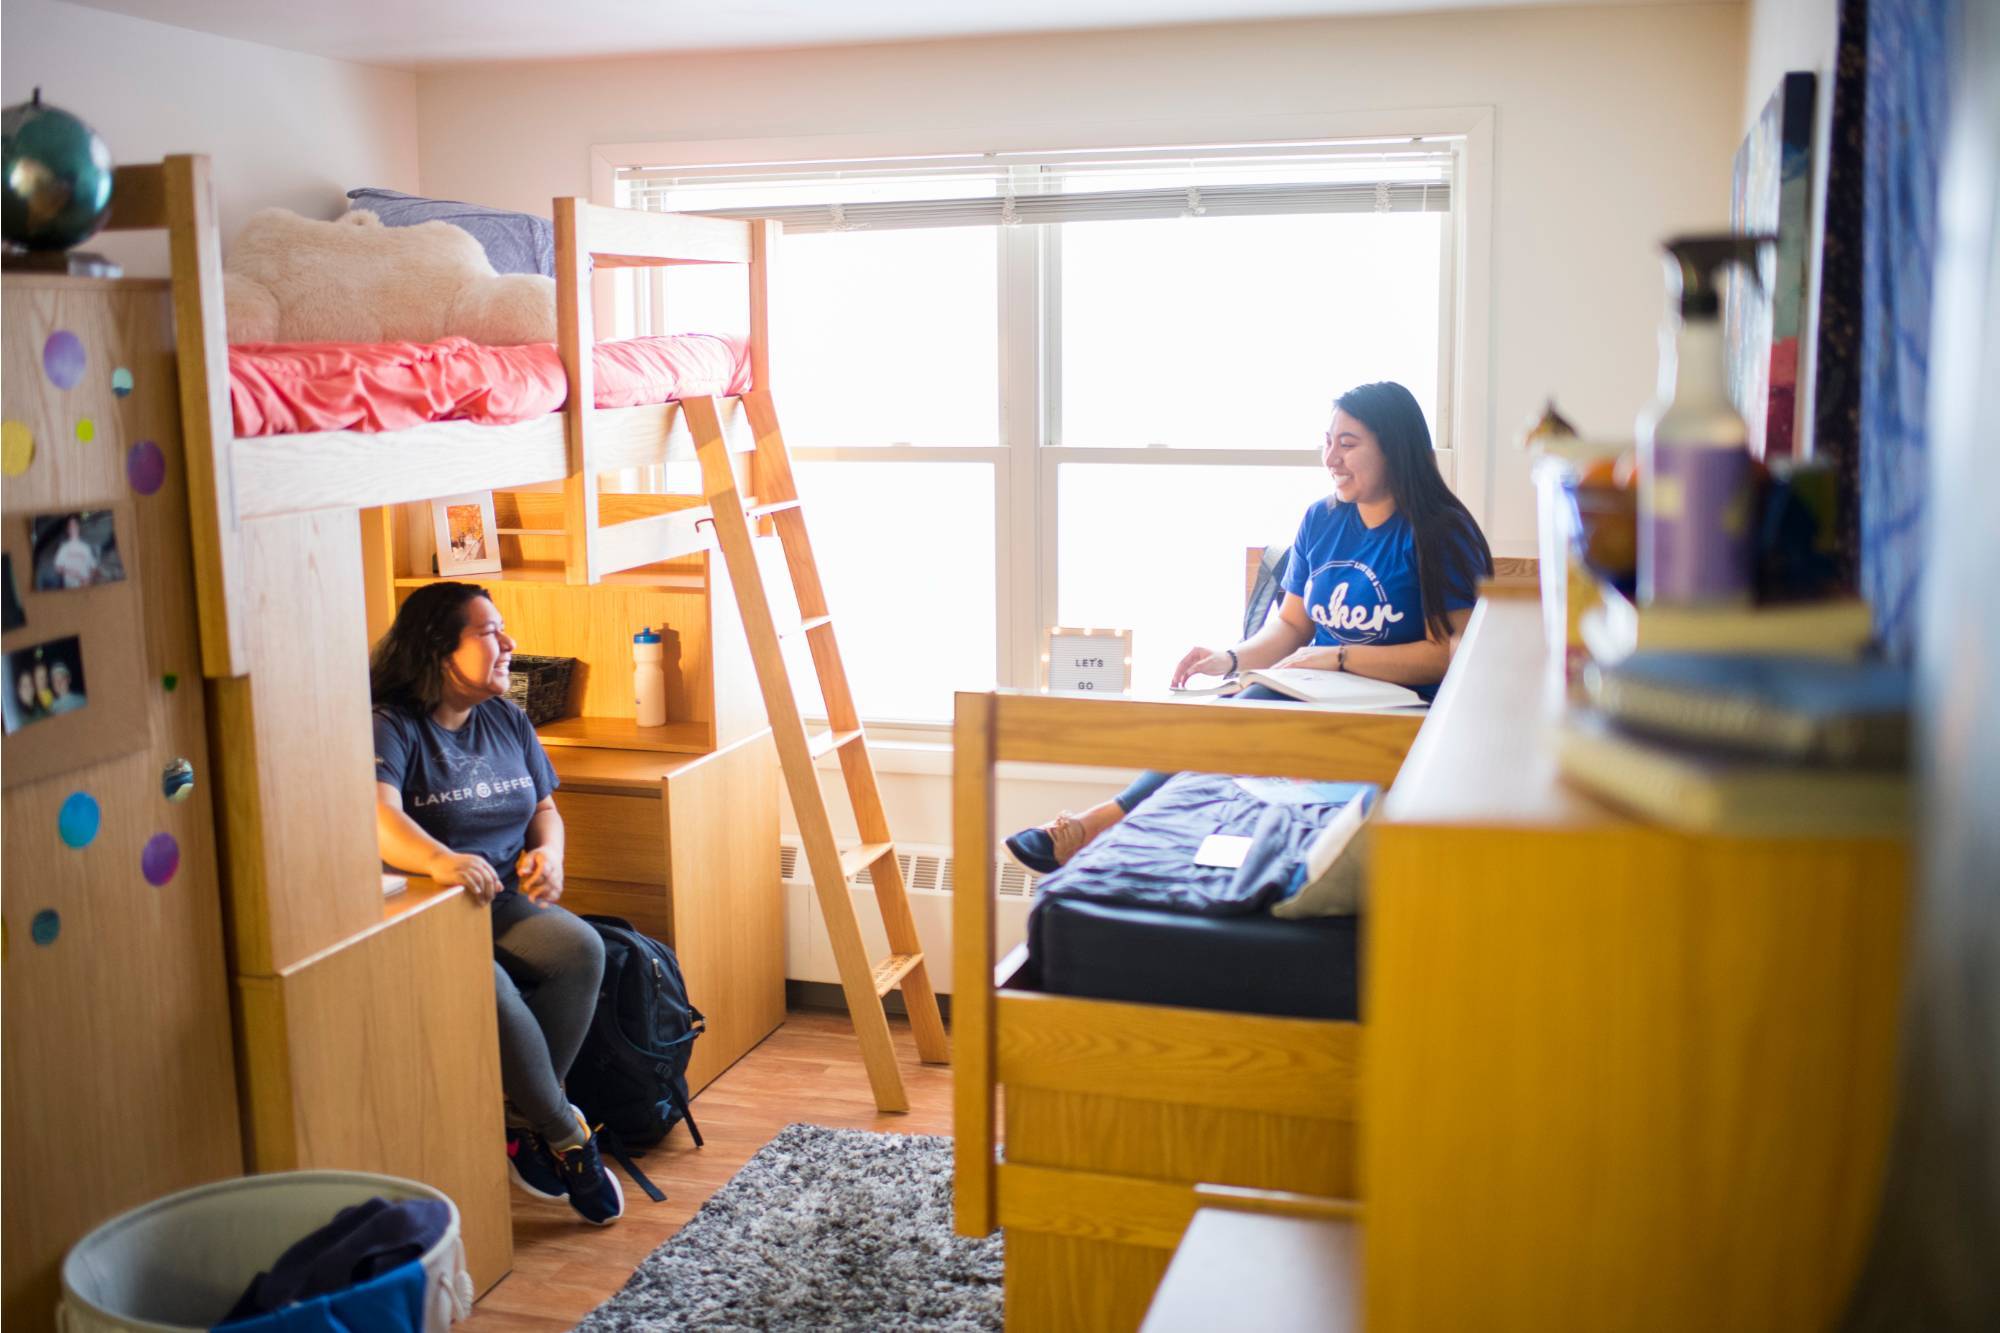 GVSU suite-style student residents studying in their room.